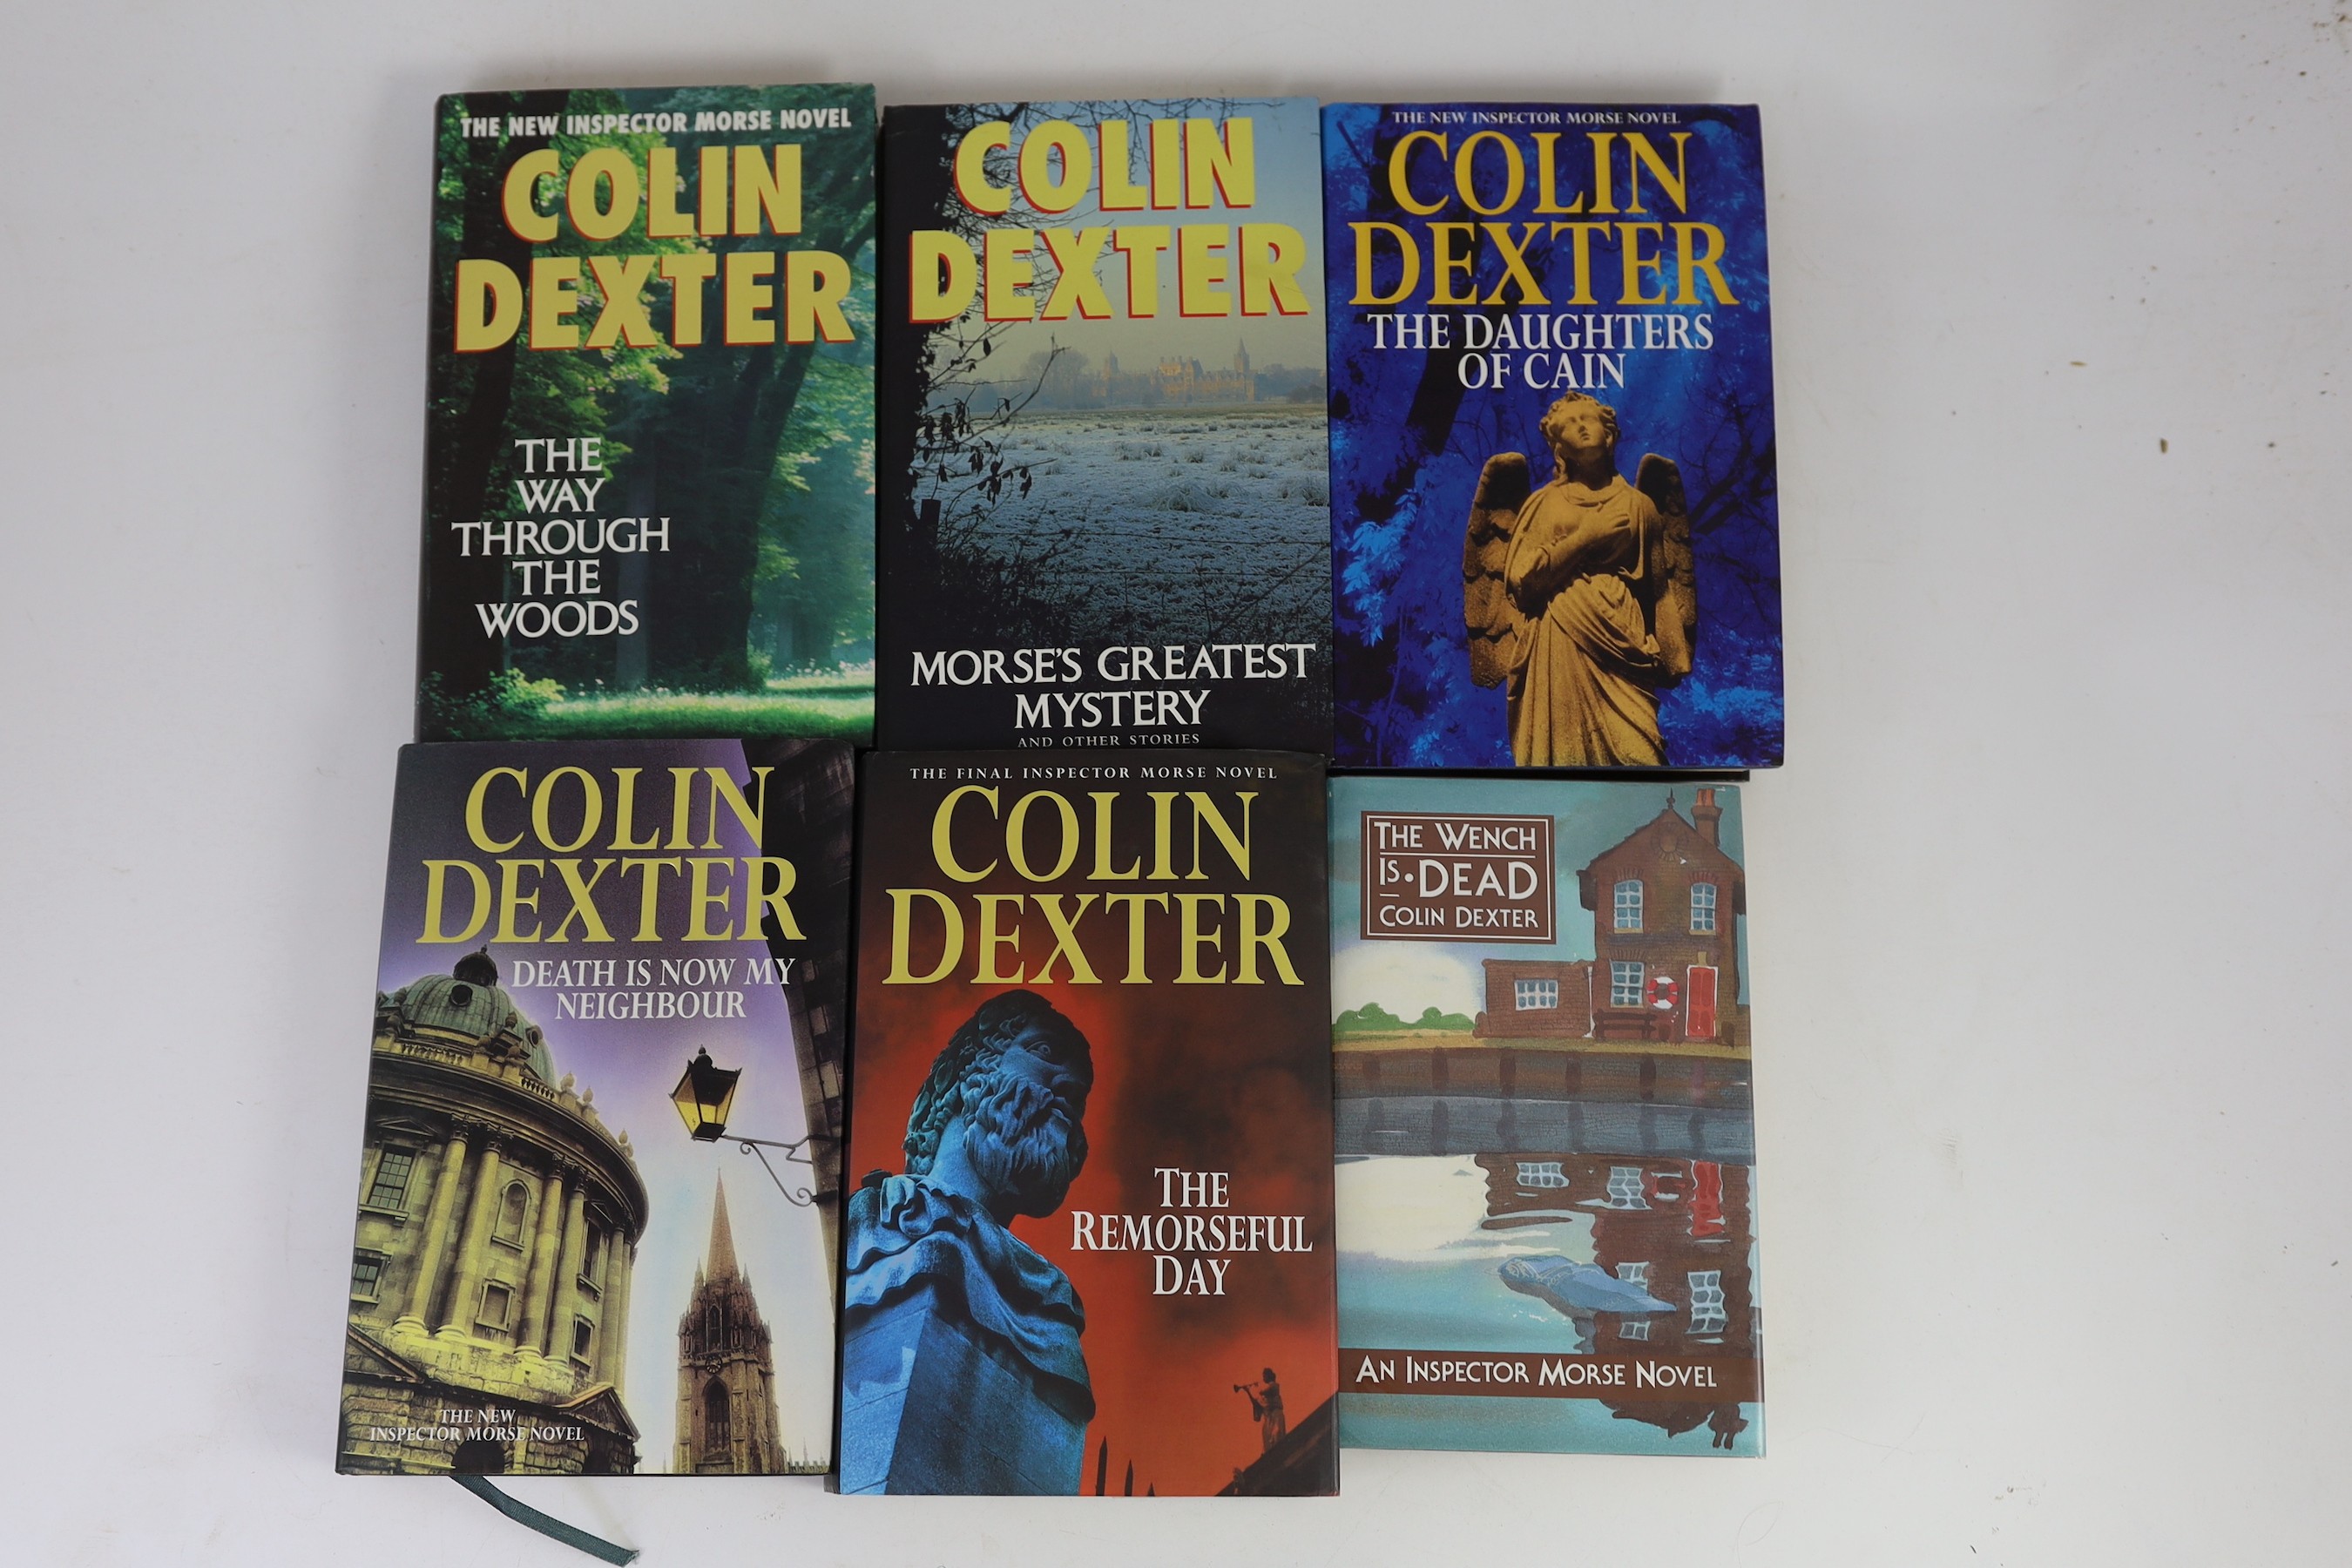 Dexter, Colin - 10 works, all 1st editions, in d/j’s, published by Macmillan, in London - The Silent World of Nicholas Quinn, 1977; Service of the Dead, 1979; The Dead of Jericho, (ex library, with stamps), 1981; The Sec